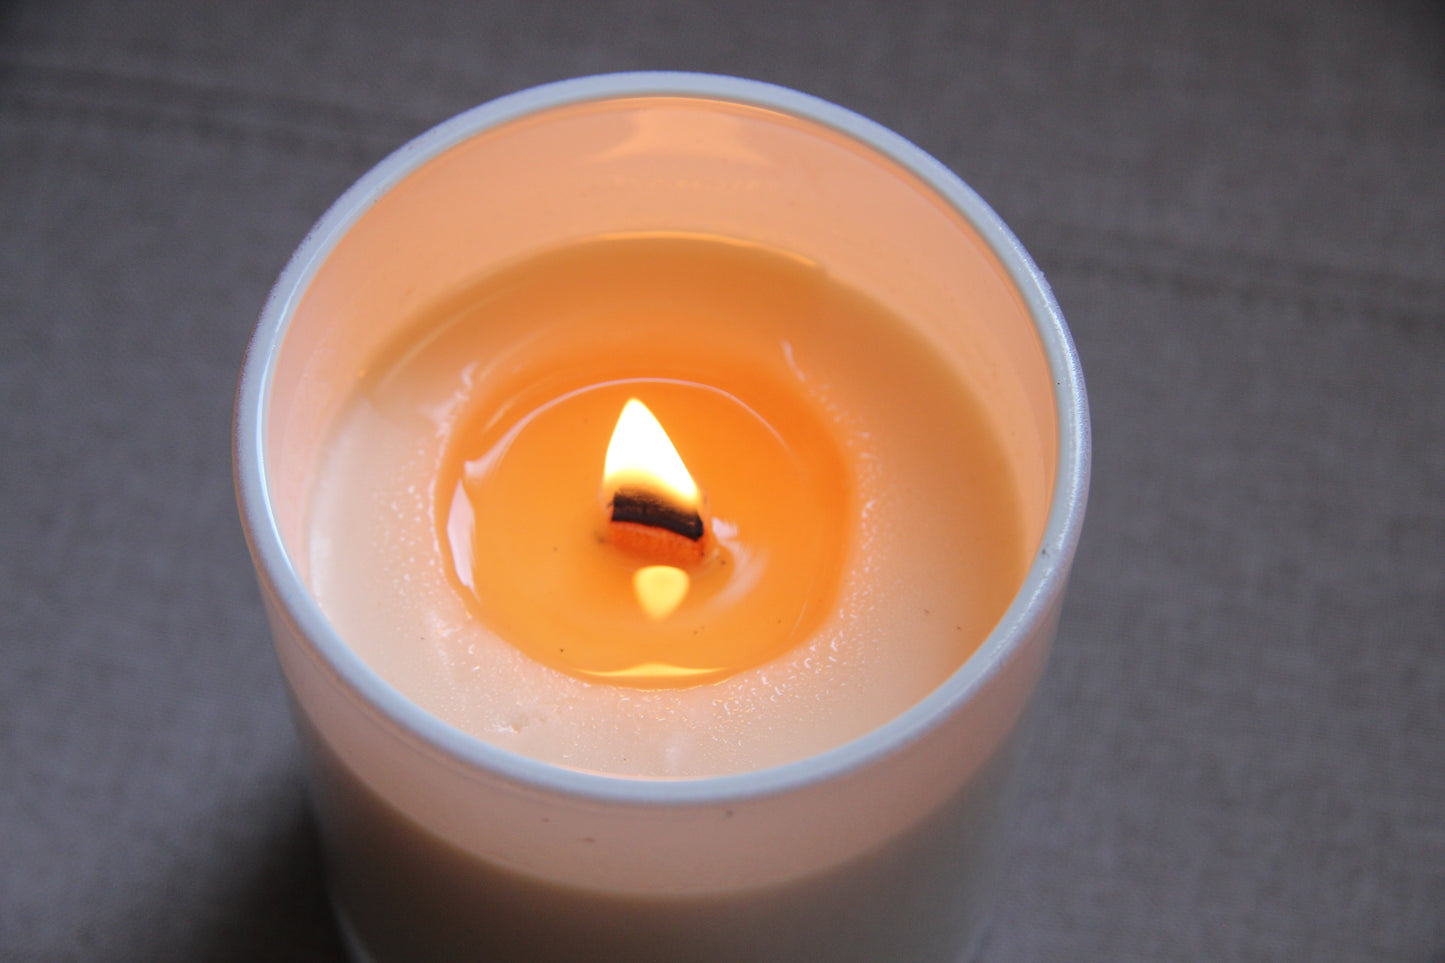 Equinox Daze Refillable Wood Wick Candle